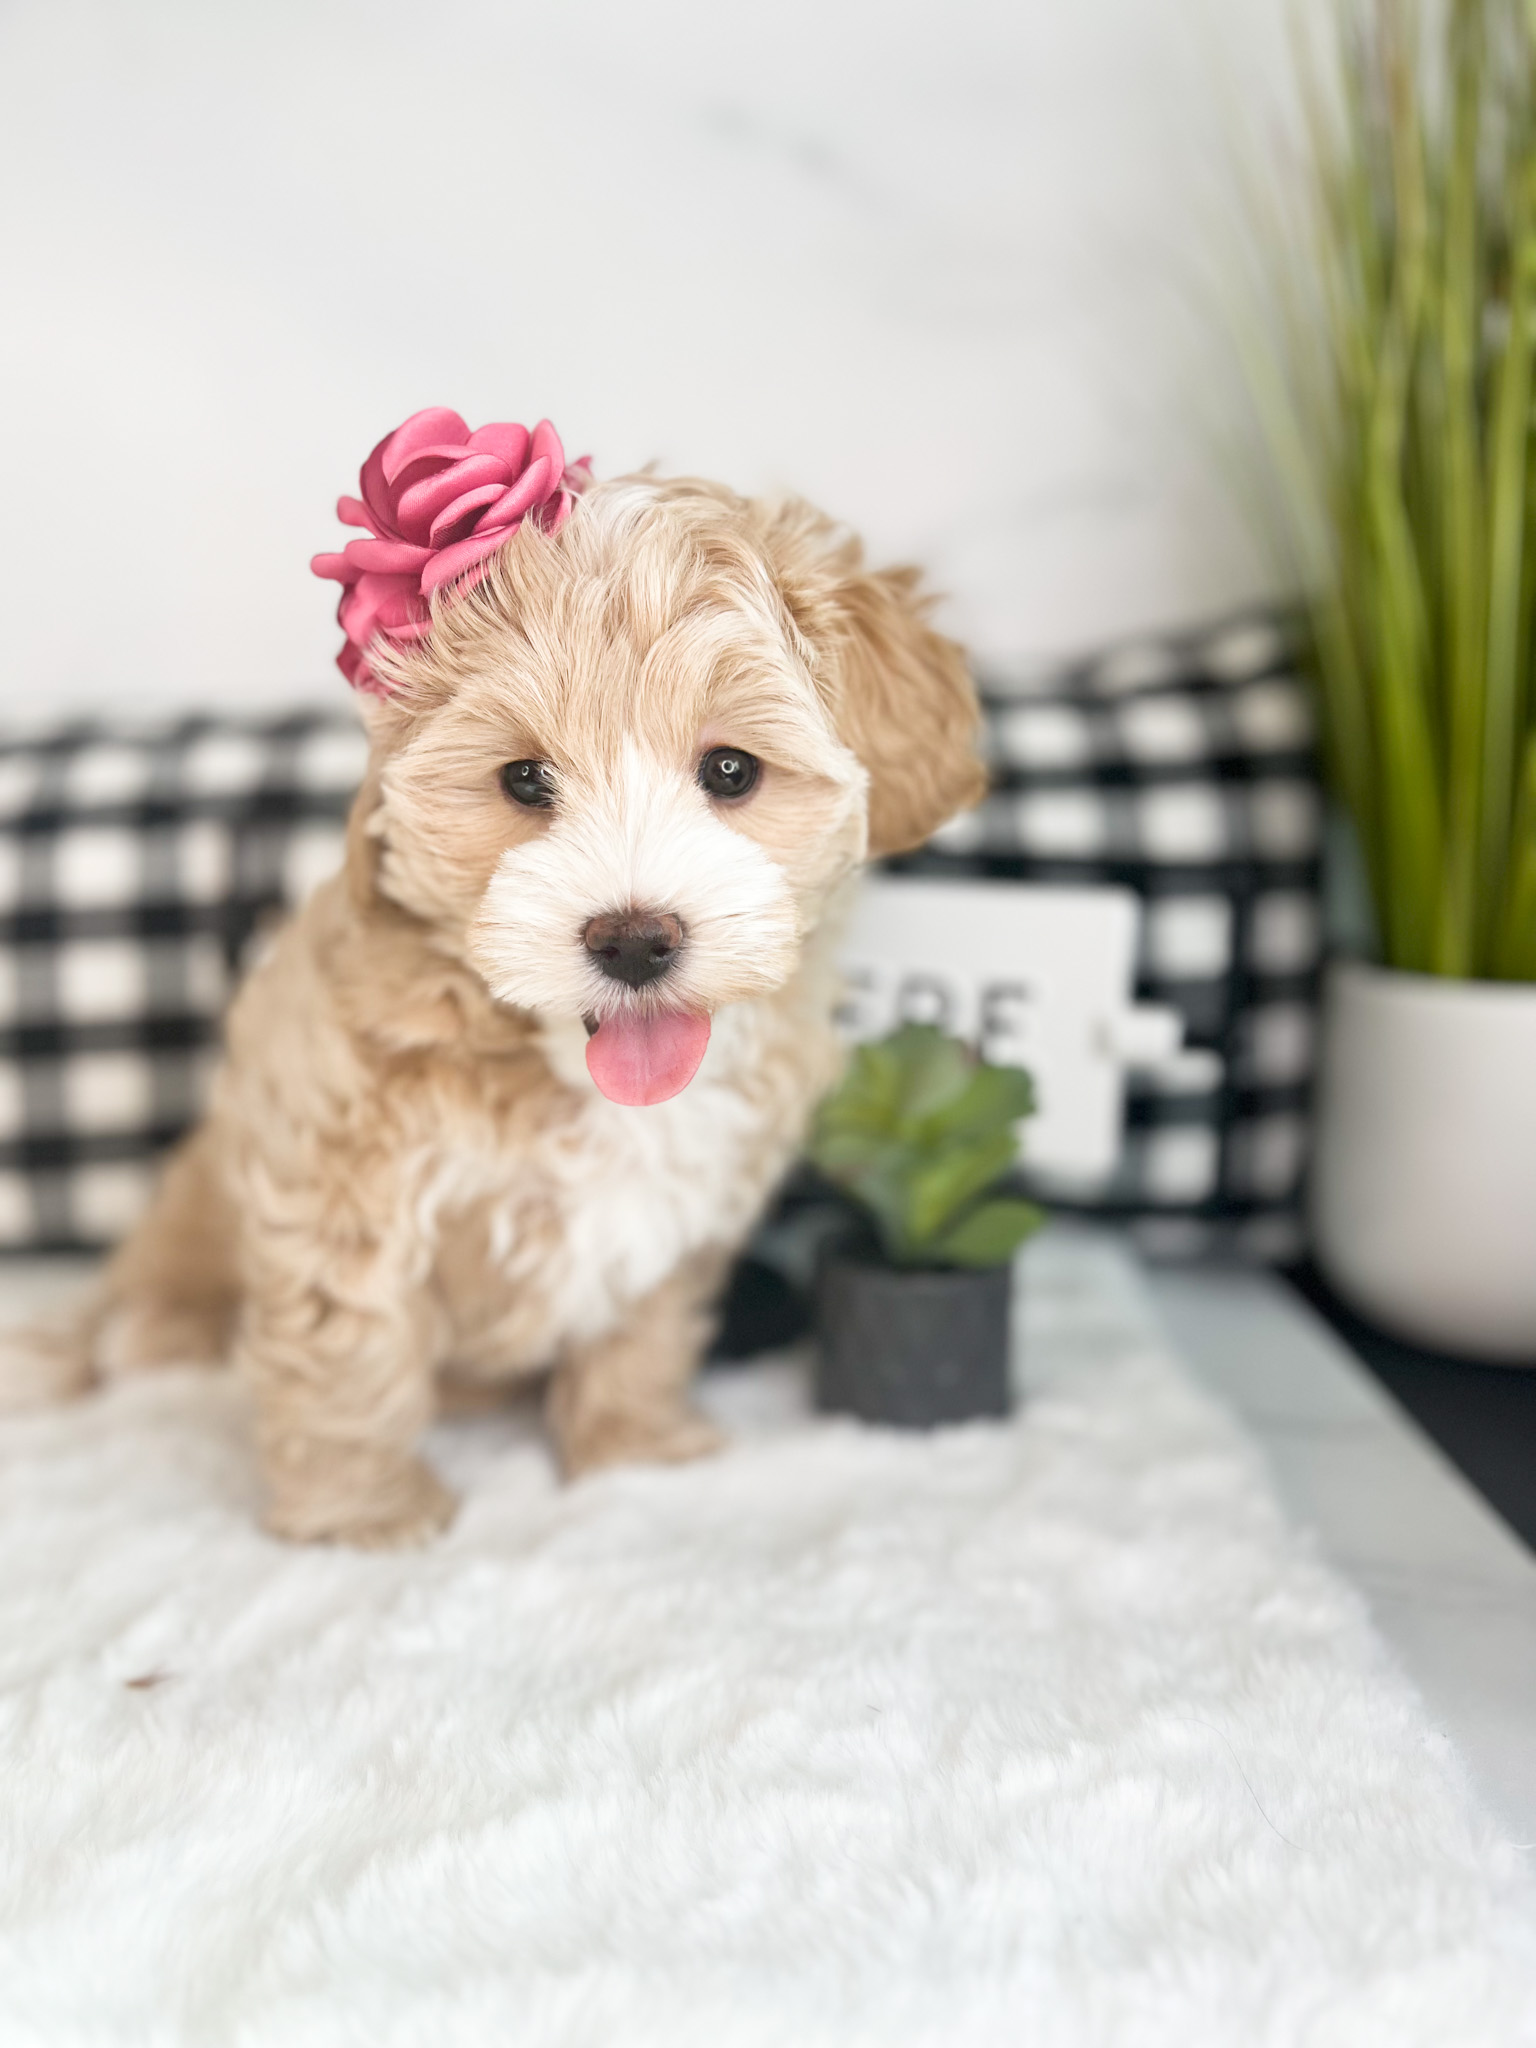 A cute, small puppy with white and brown fur wearing a pink flower on its head.